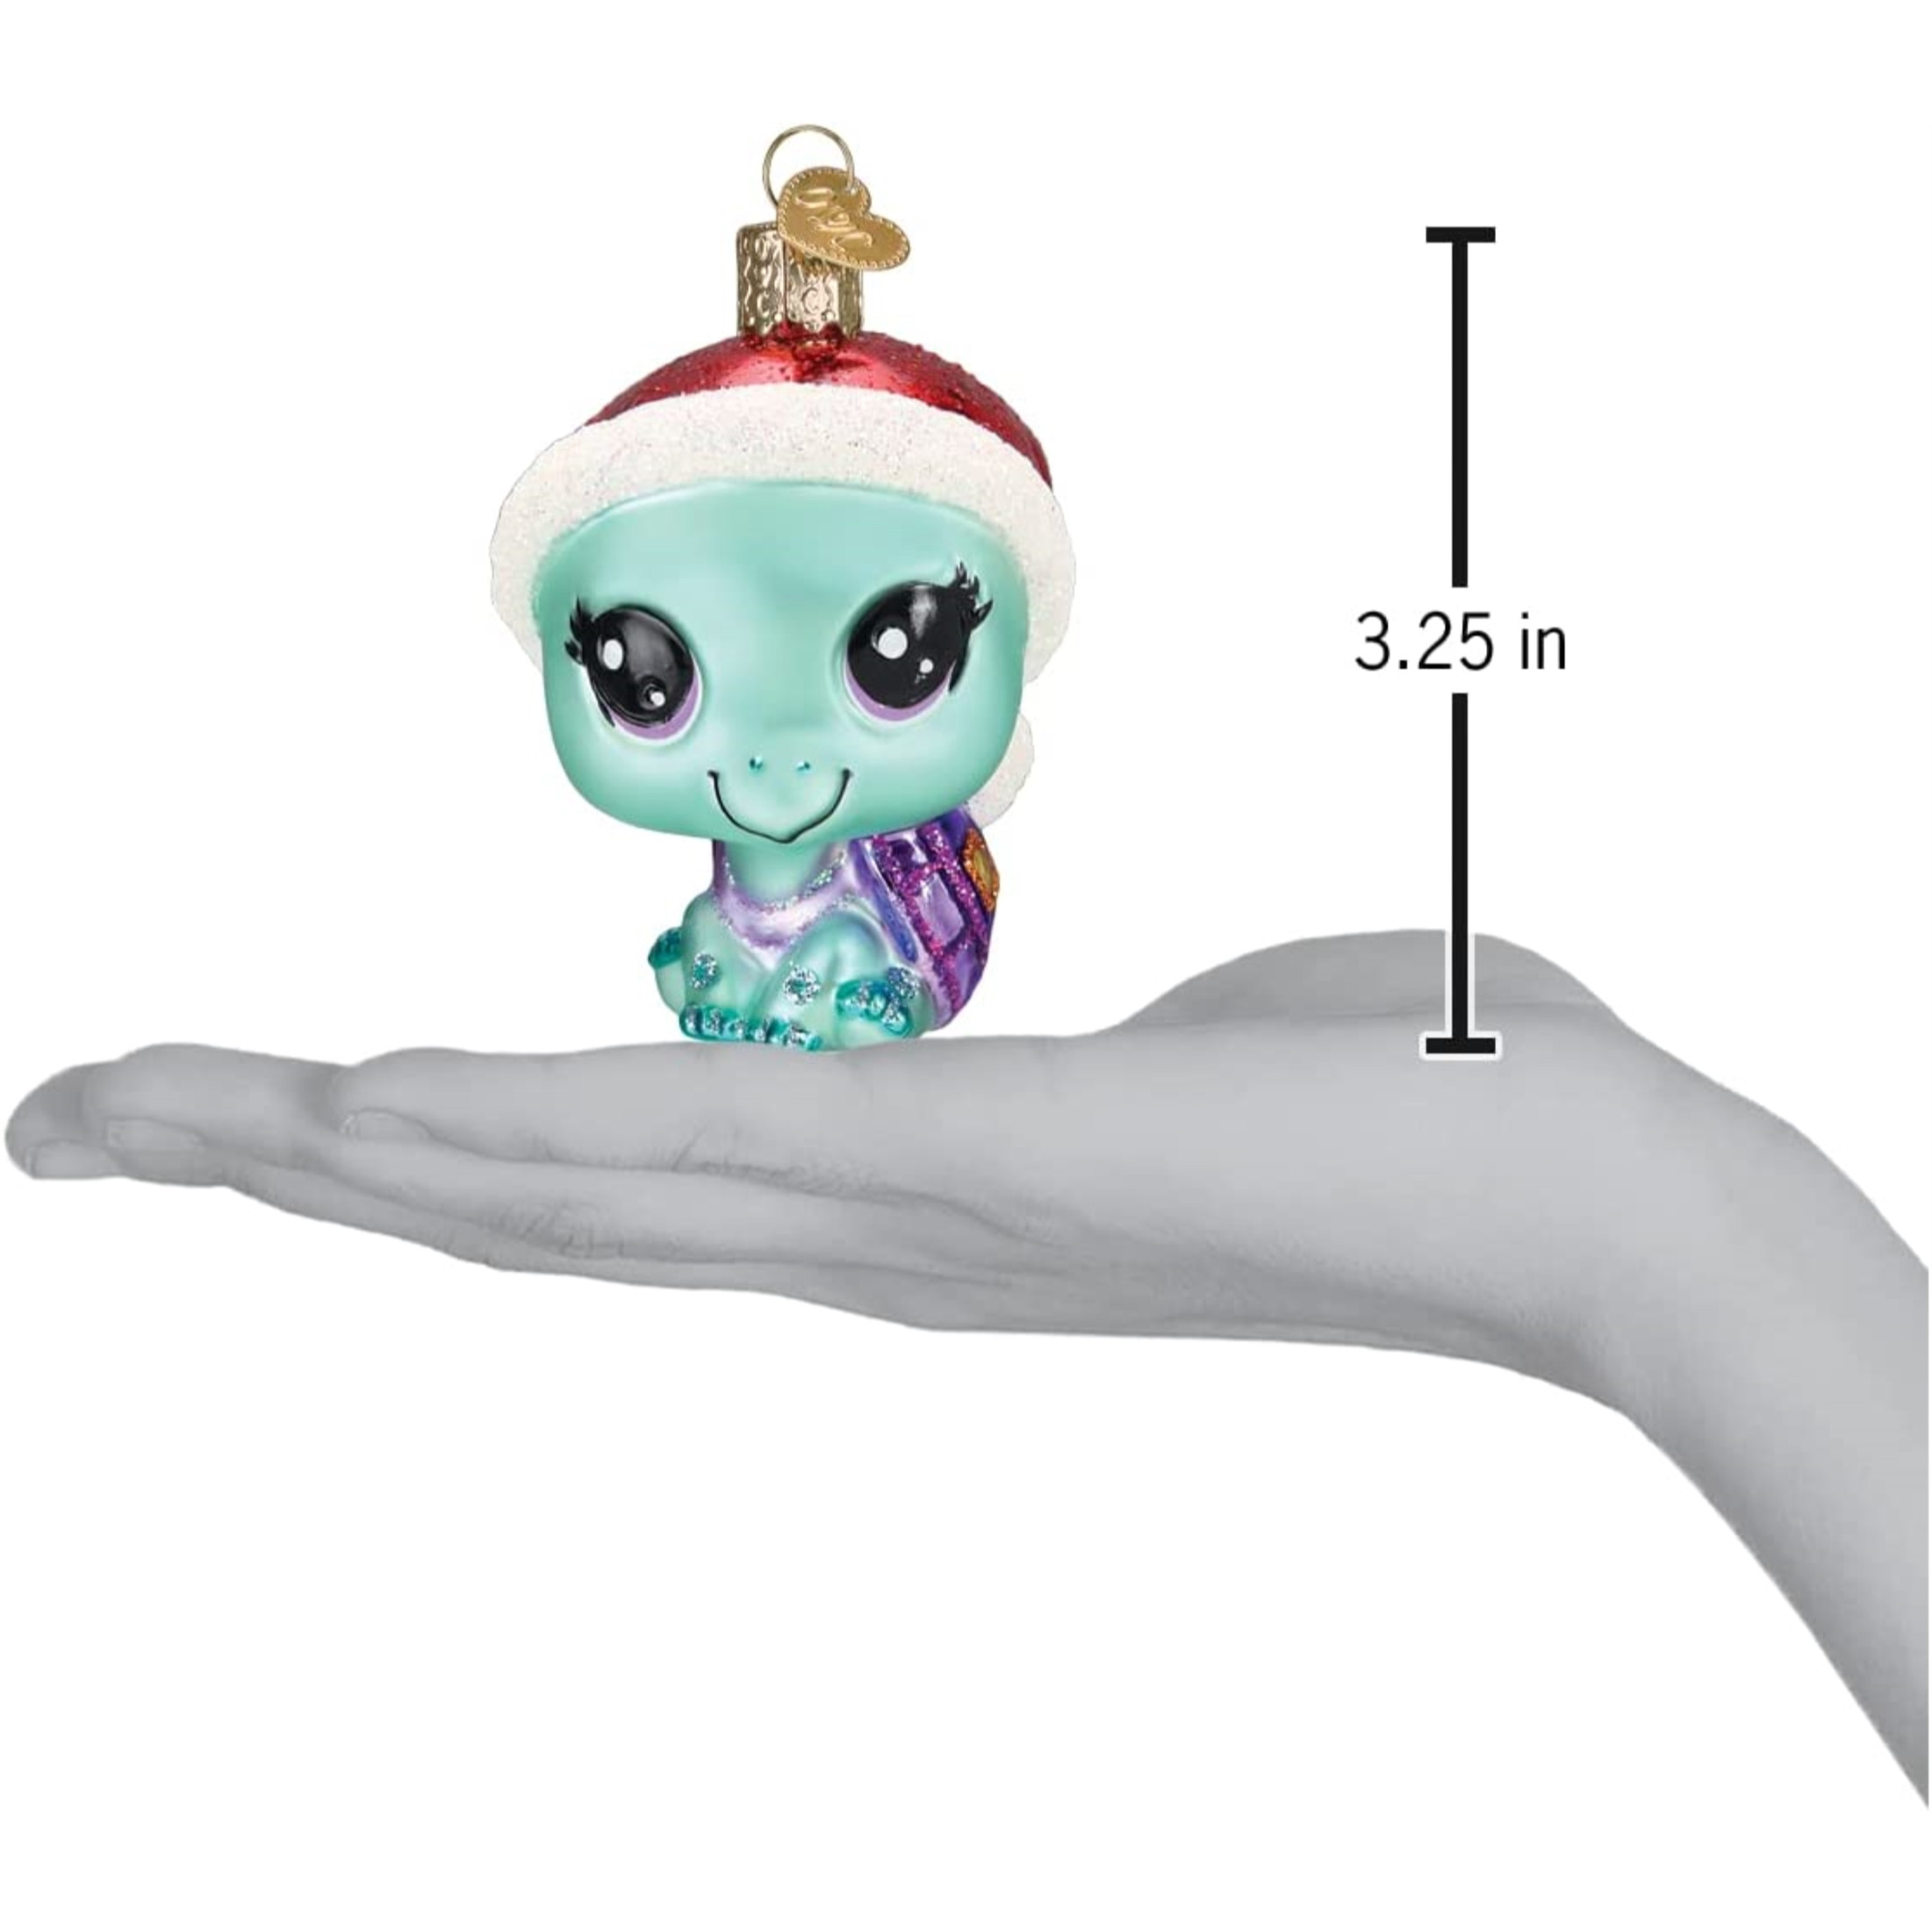 Old World Christmas Glass Blown Christmas Ornament, Littlest Pet Shop Bev (With OWC Gift Box)